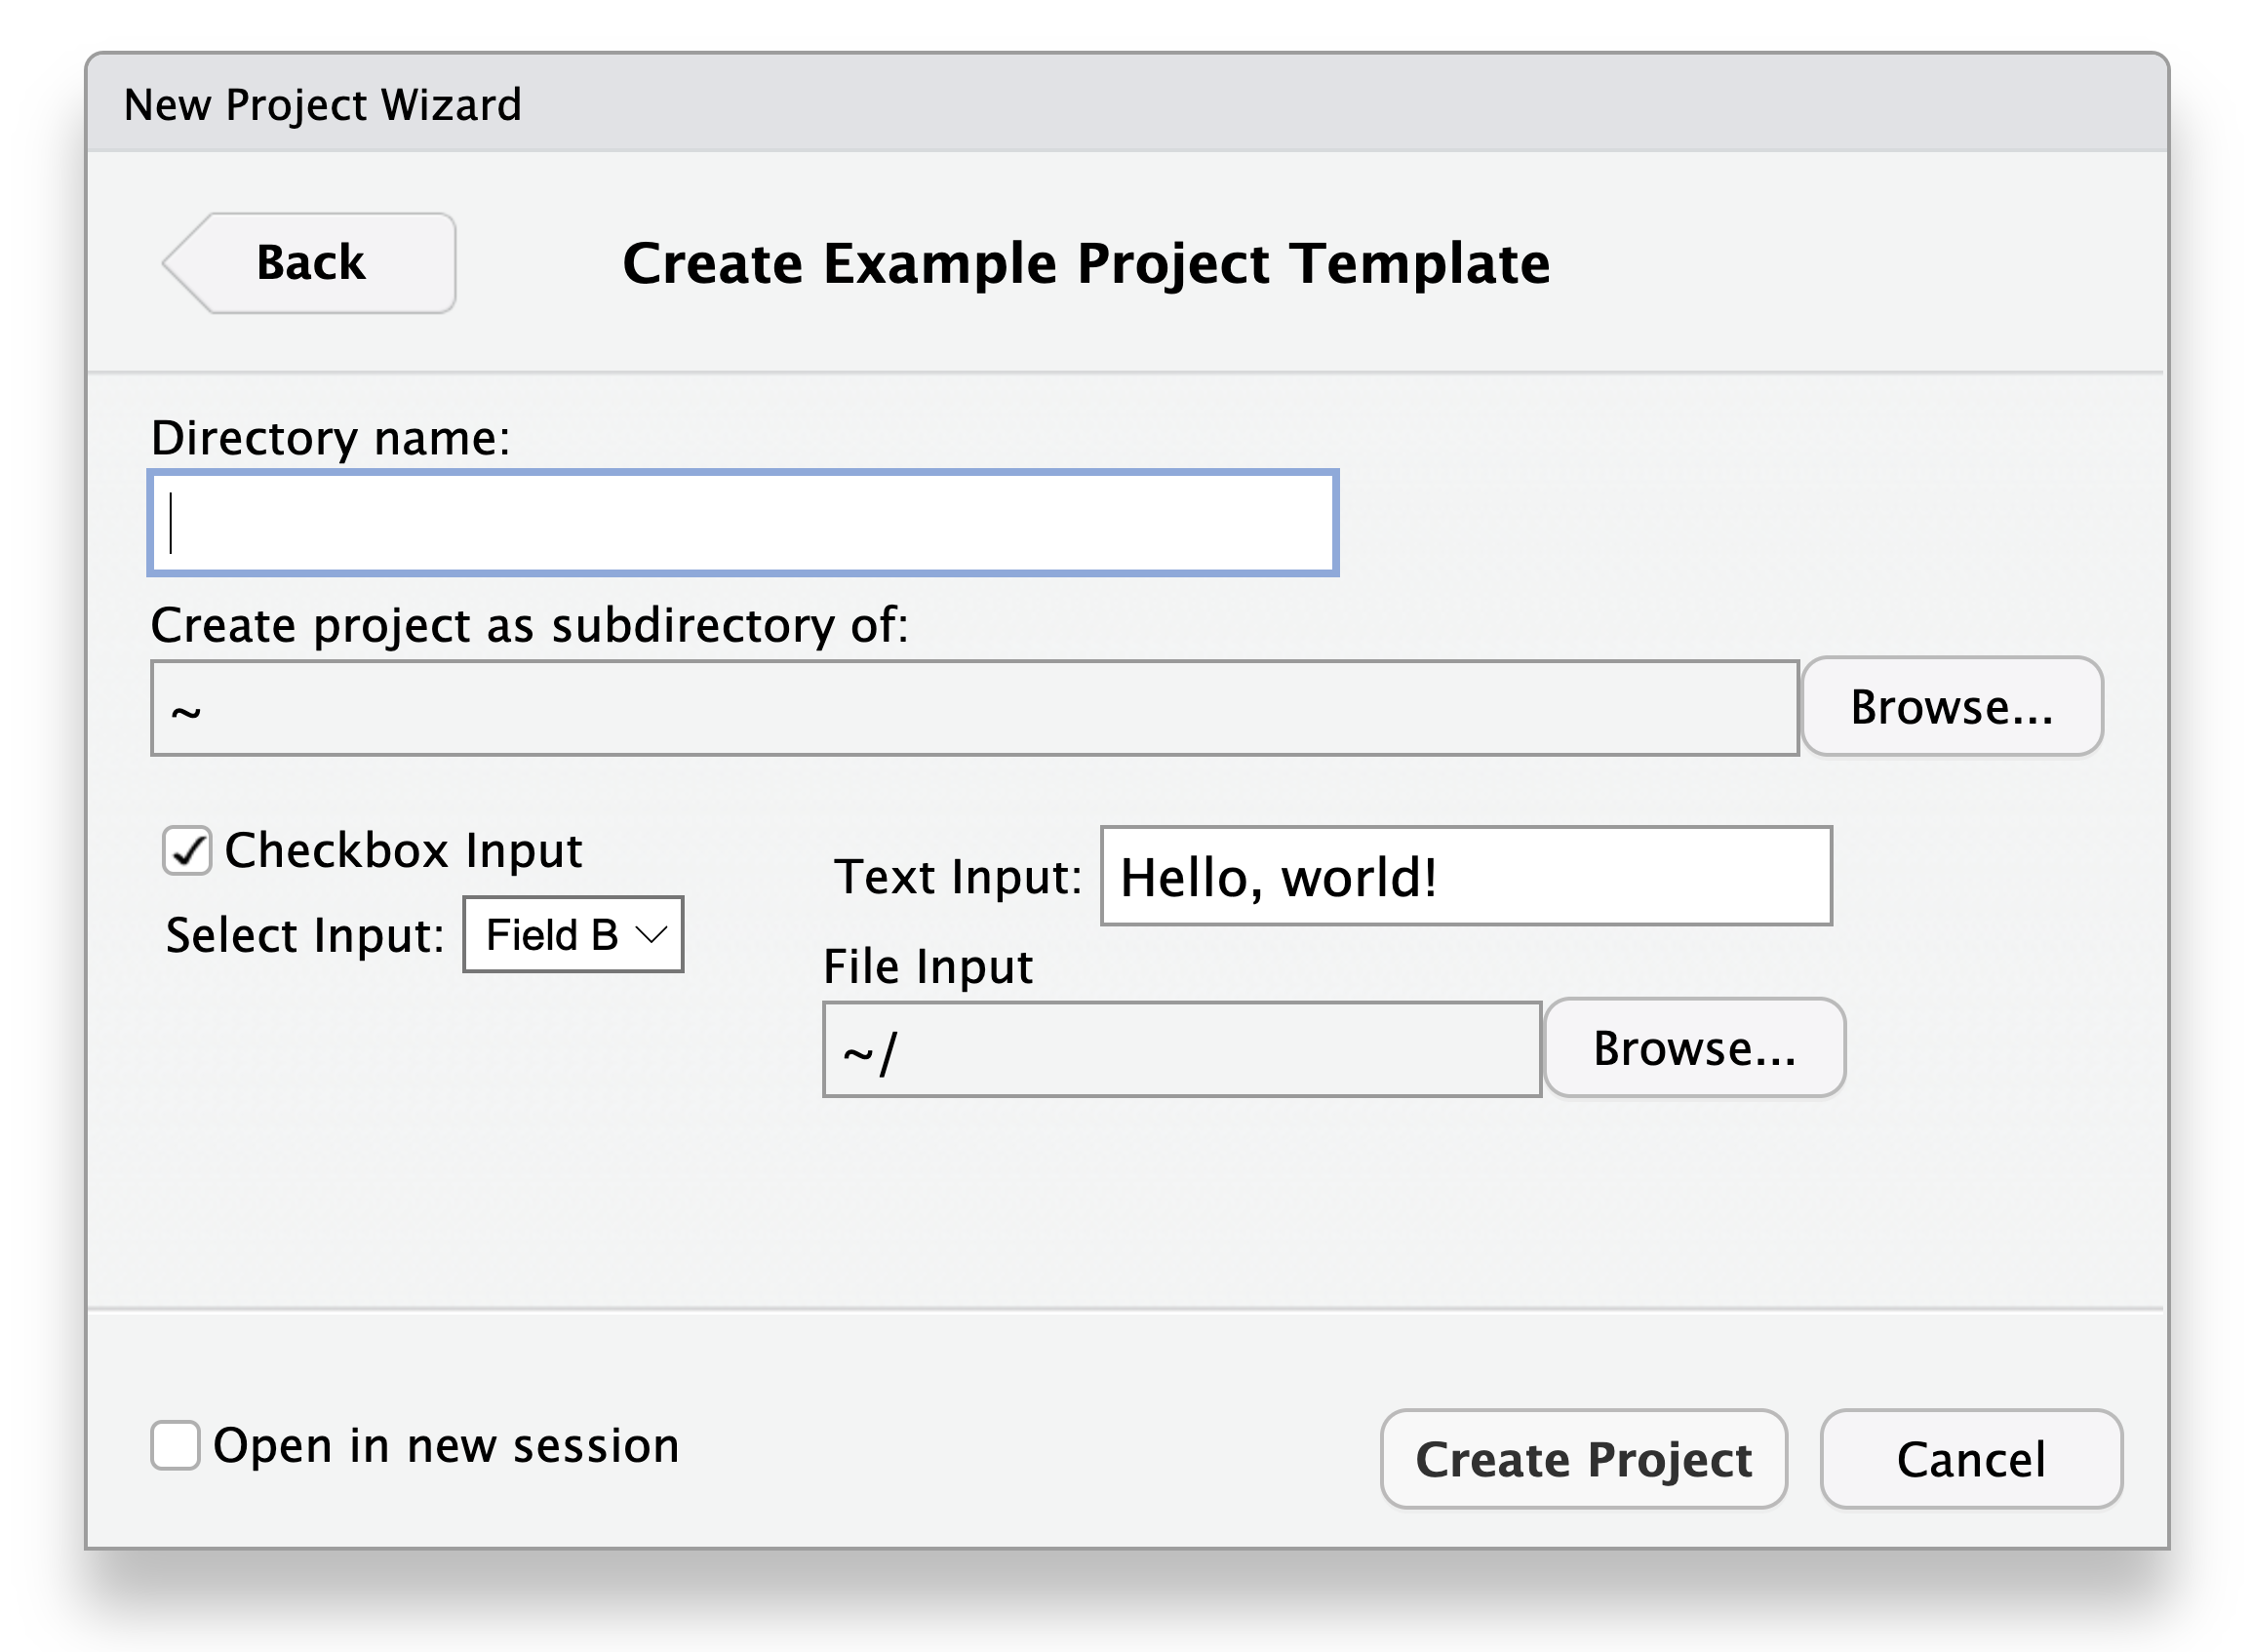 A screenshot of the Create Example Project Template wizard with a directory name and other user input options.